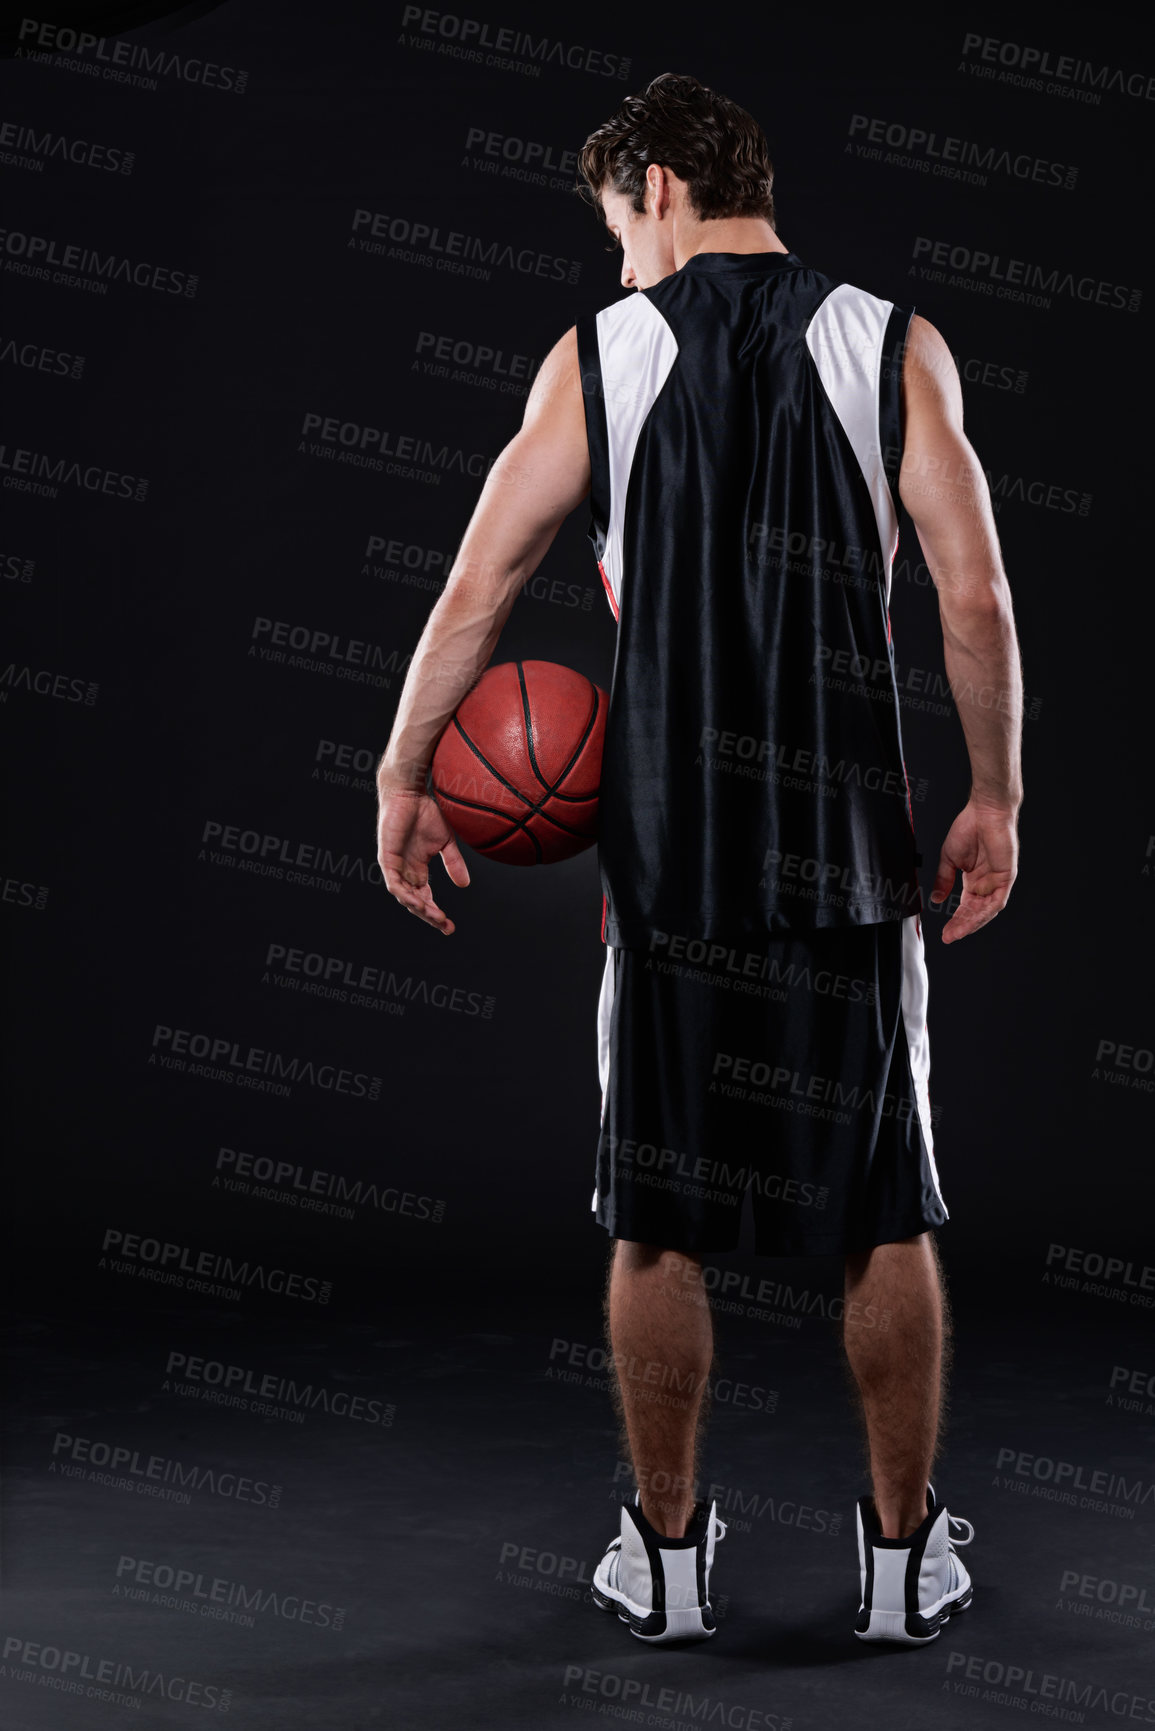 Buy stock photo Rearview studio shot of a basketball player holding a basketball against a black background